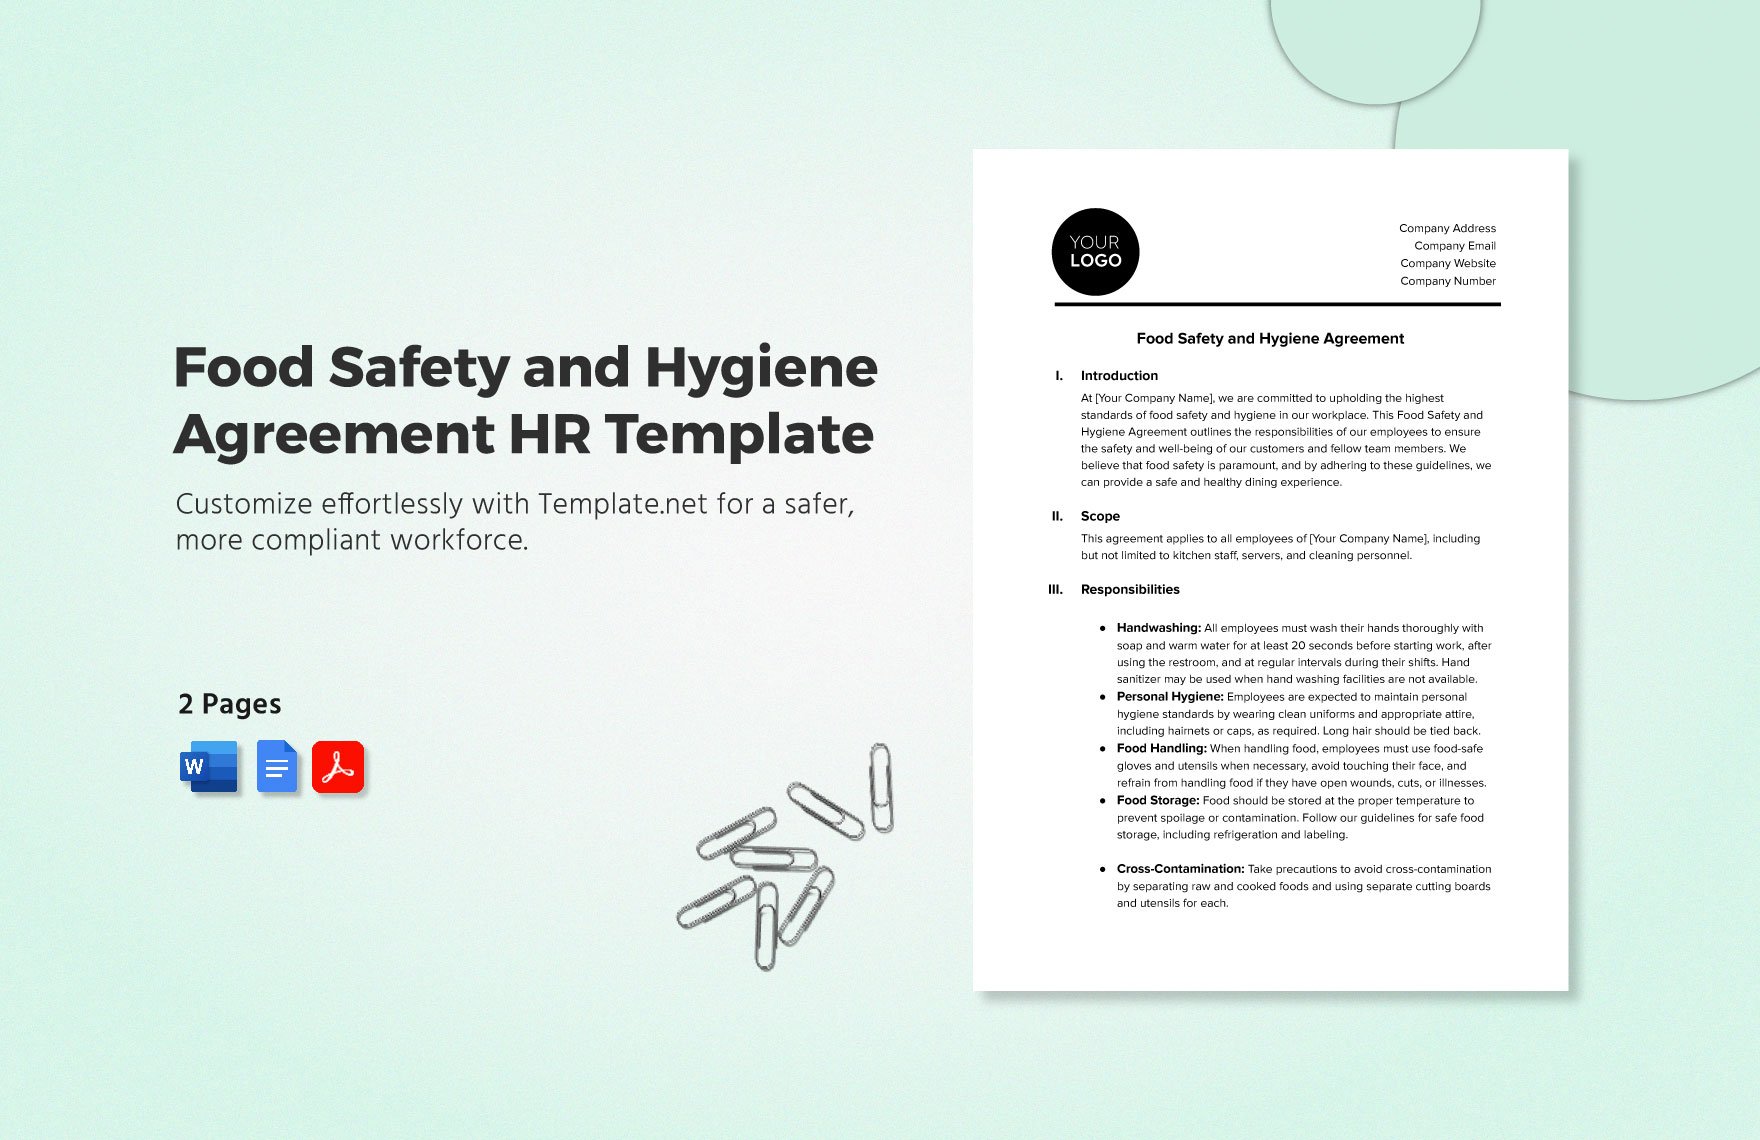 Food Safety and Hygiene Agreement HR Template